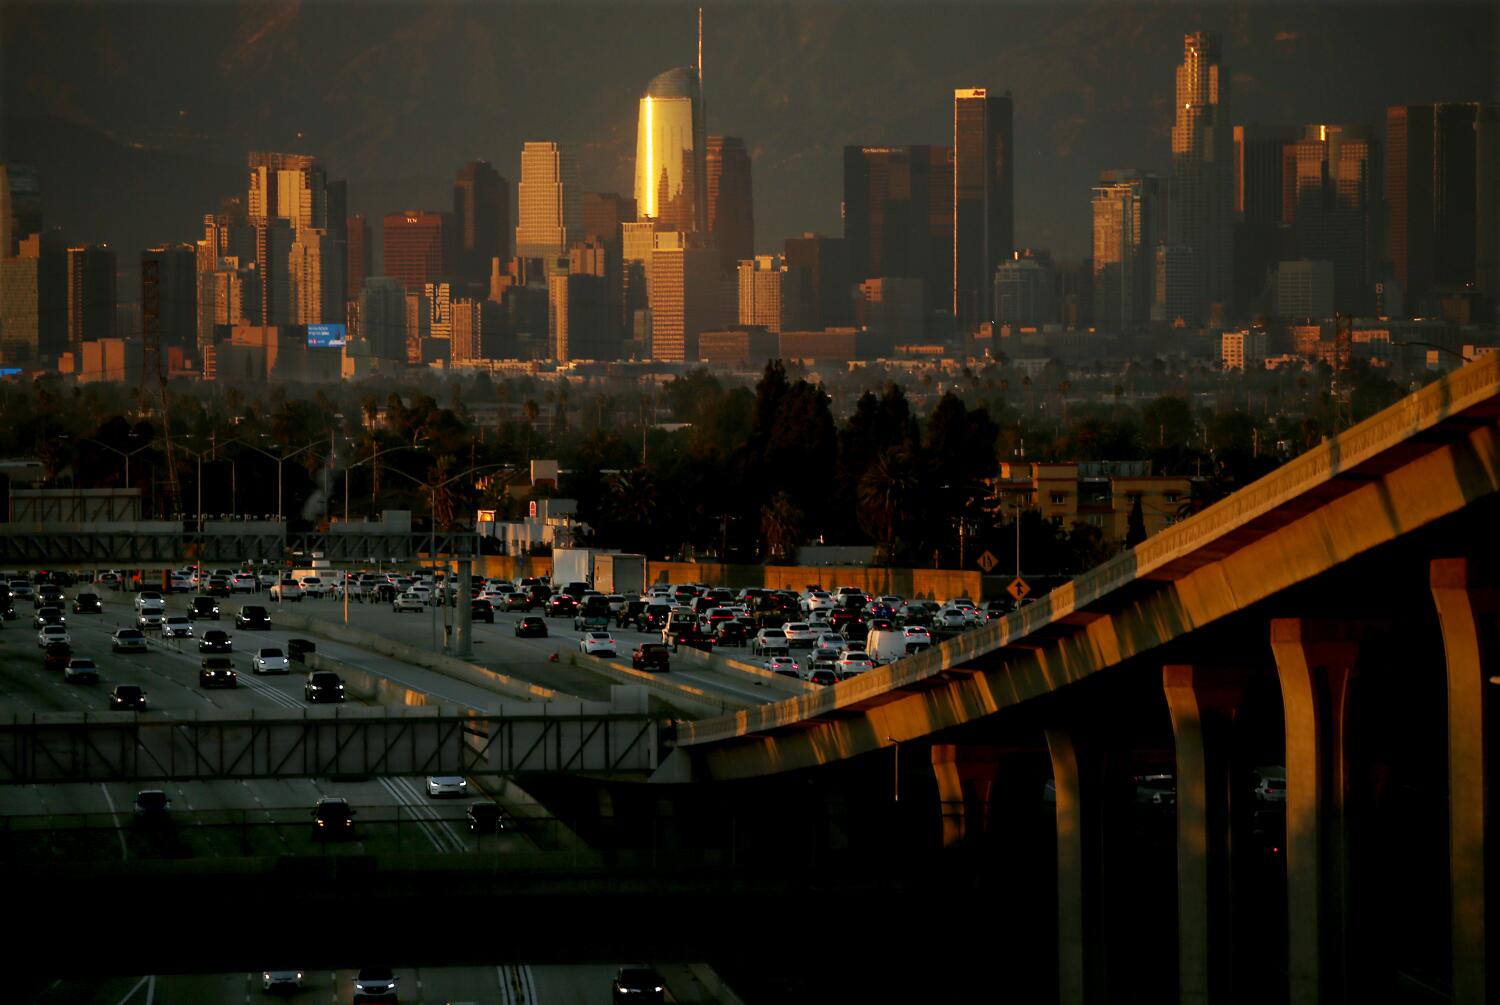 Southern California is in an unseasonably warm heat wave. How hot could it get where you are? 